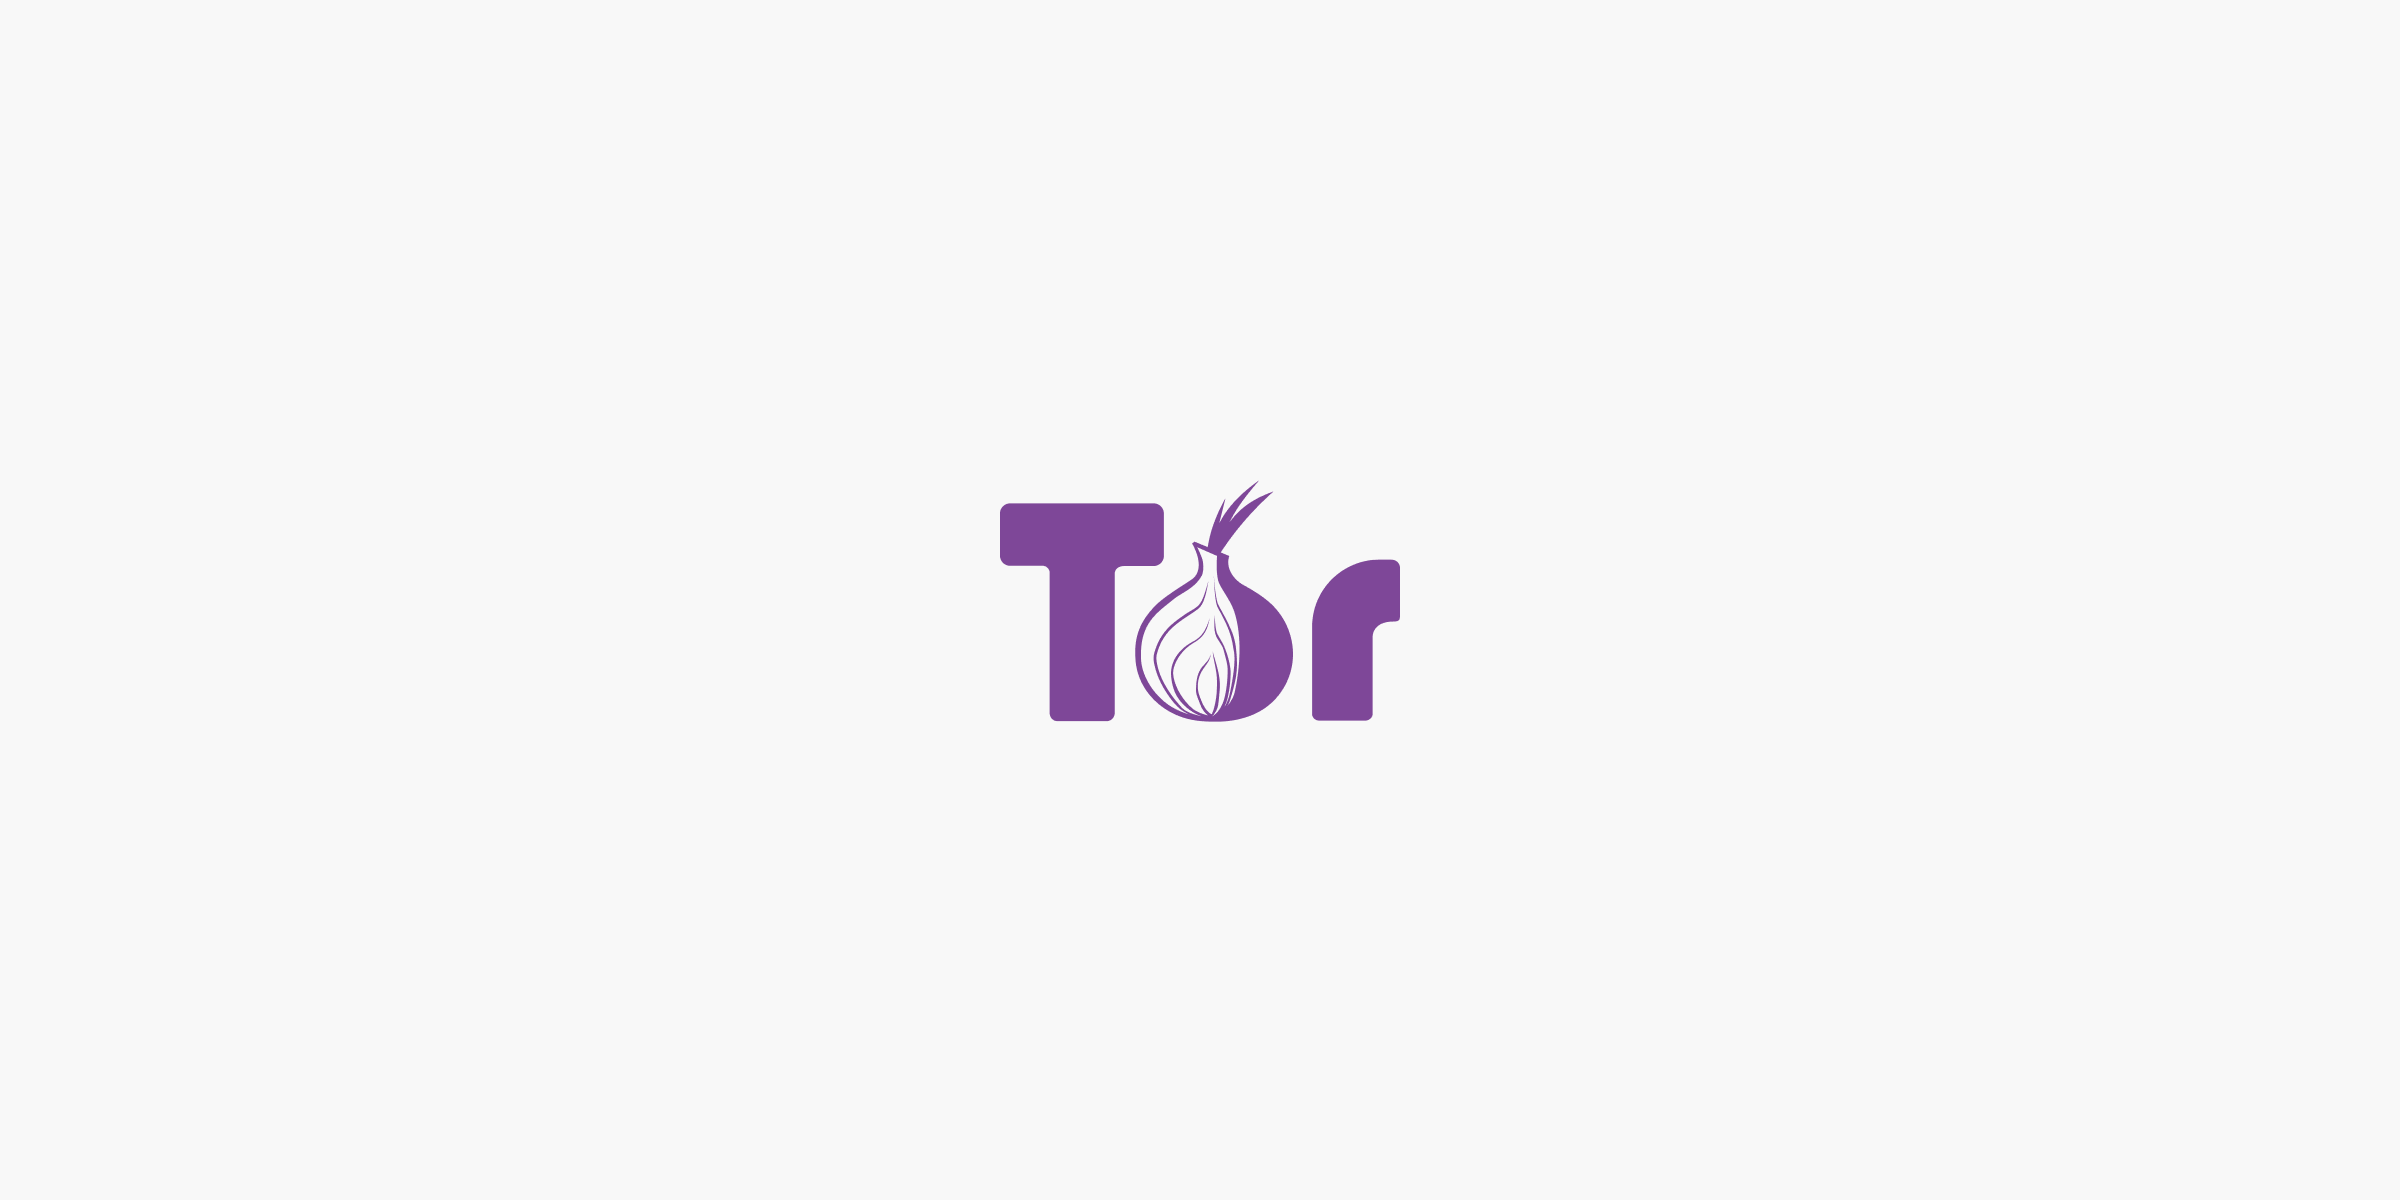 Introducing The Tor Project